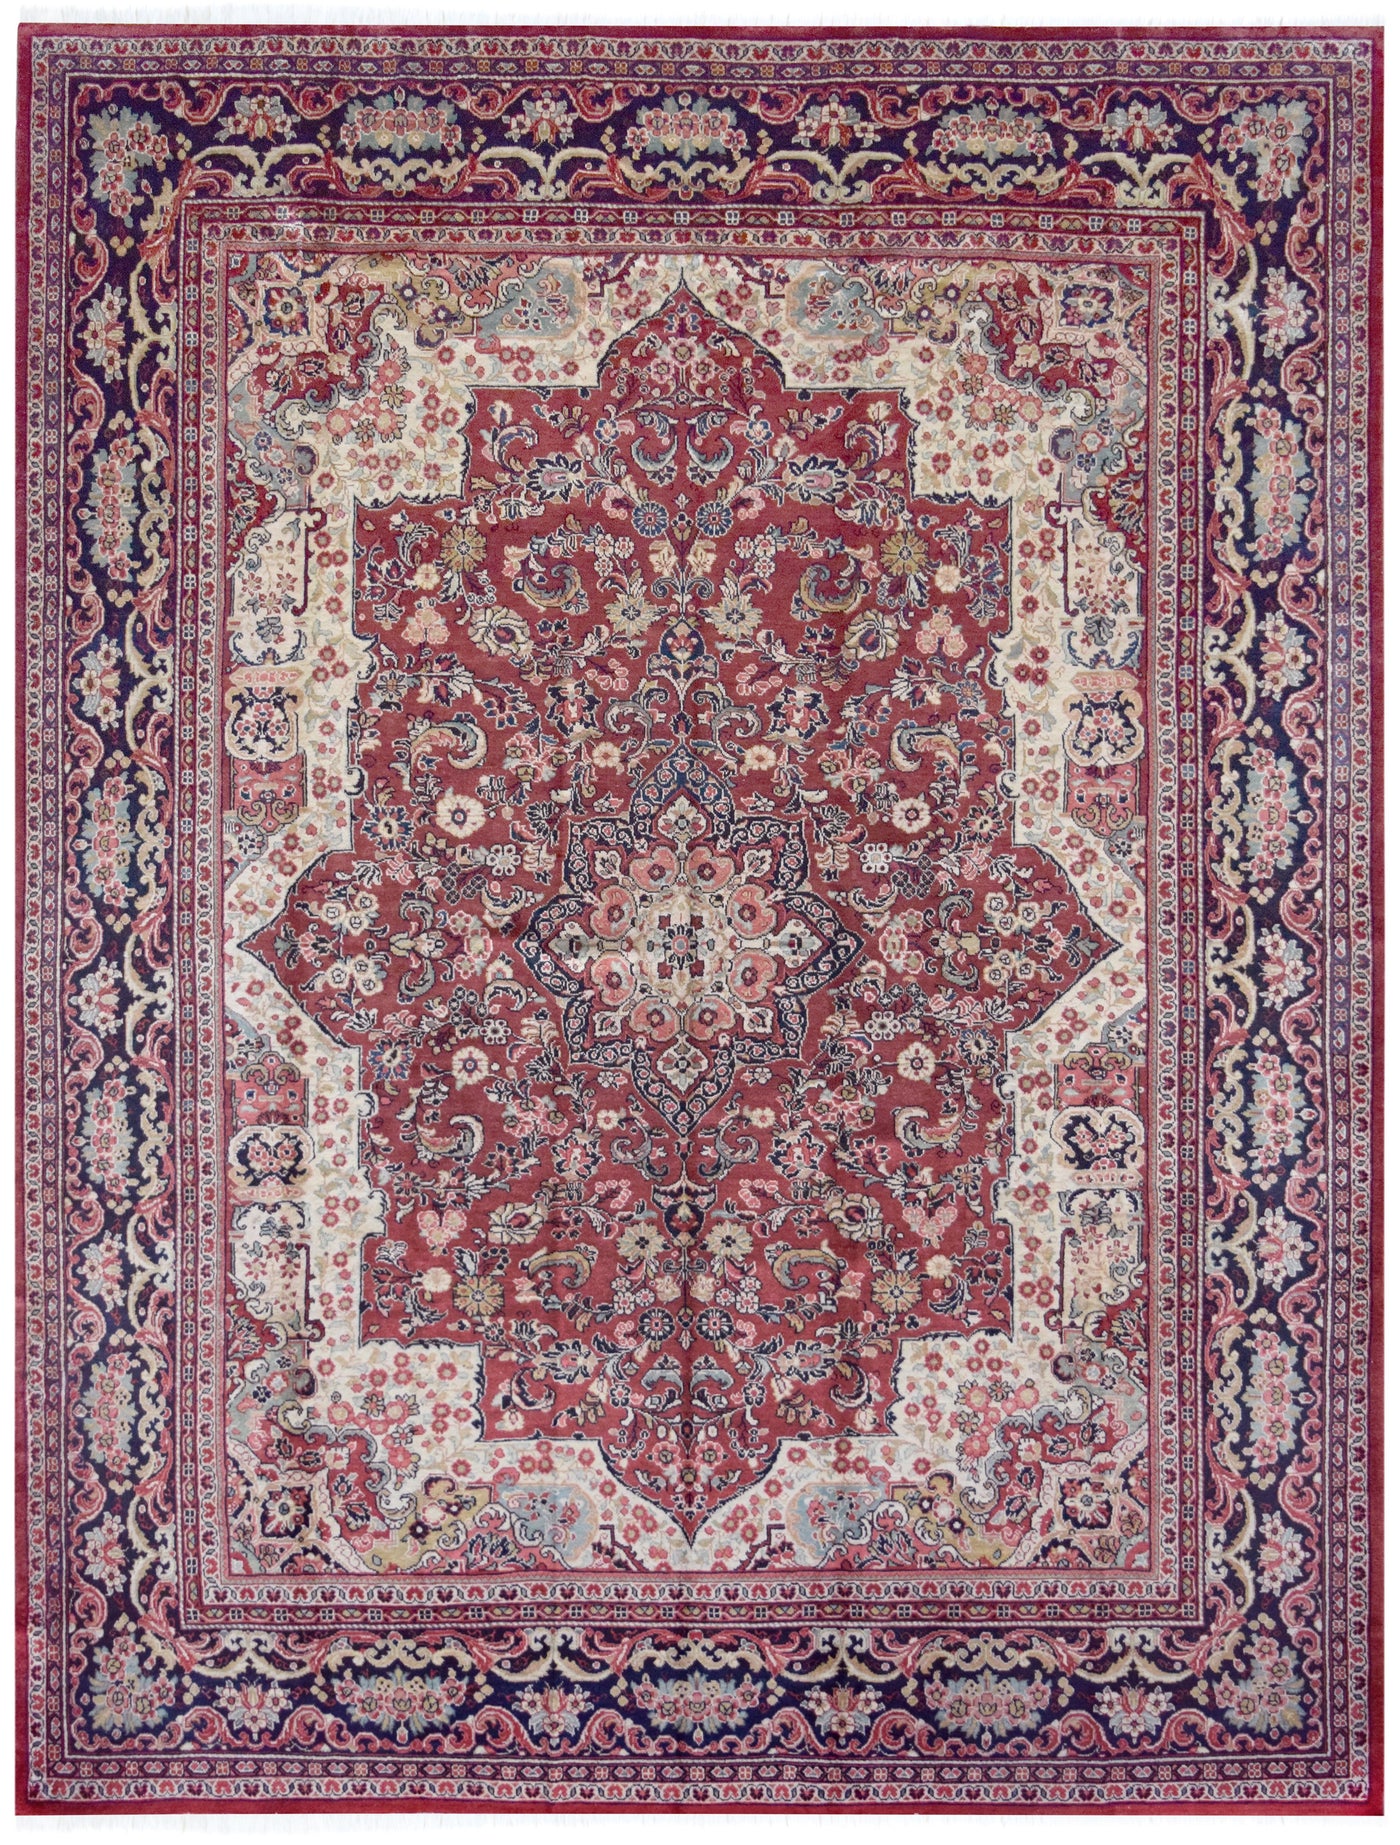 Antique Persian Medallion Sultanabad Rug